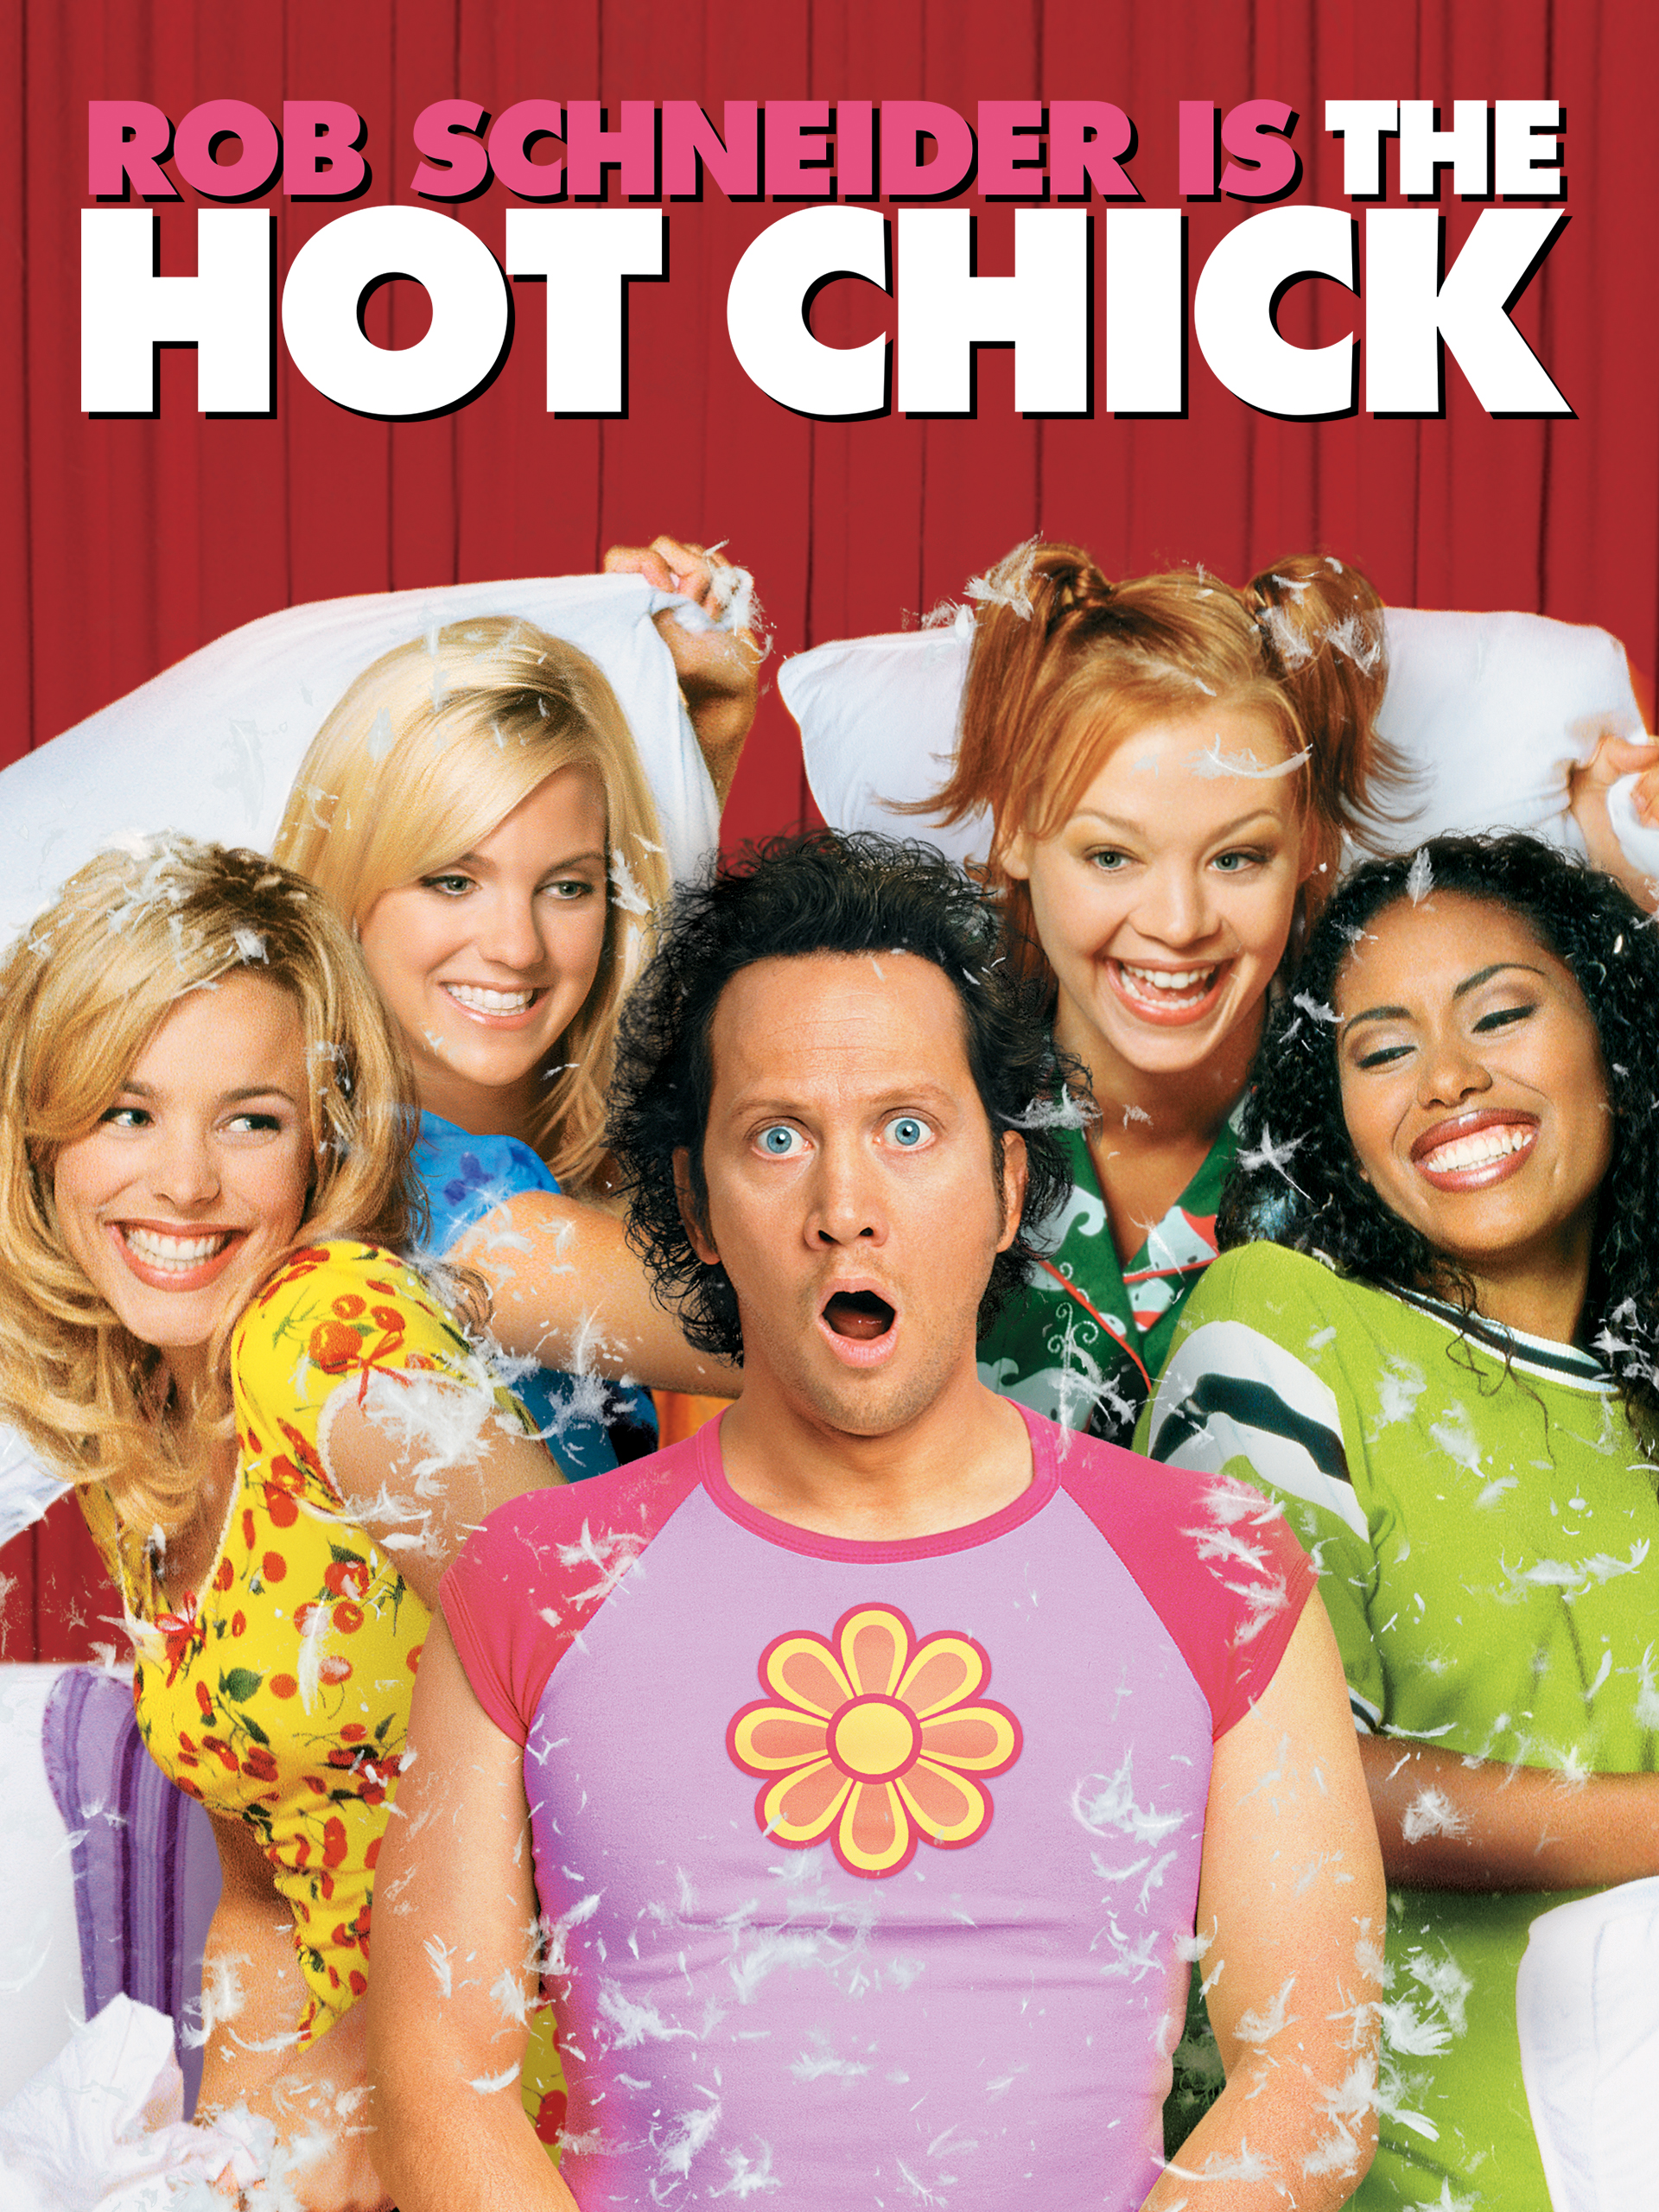 david washer recommends hot chick movie online pic